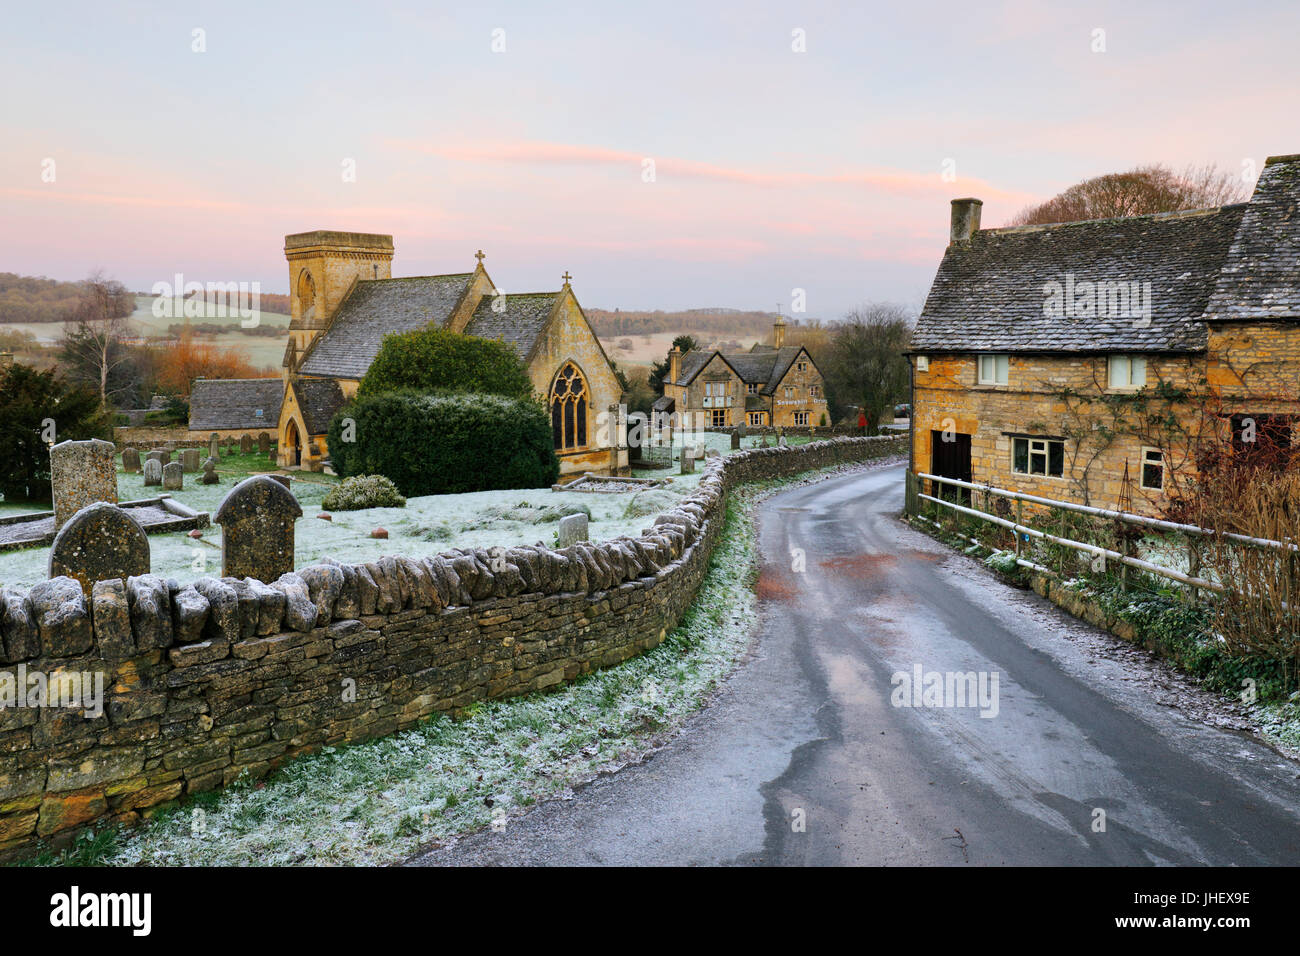 St Barnabas church and Cotswold stone cottages in winter frost, Snowshill, Cotswolds, Gloucestershire, England, United Kingdom, Europe Stock Photo